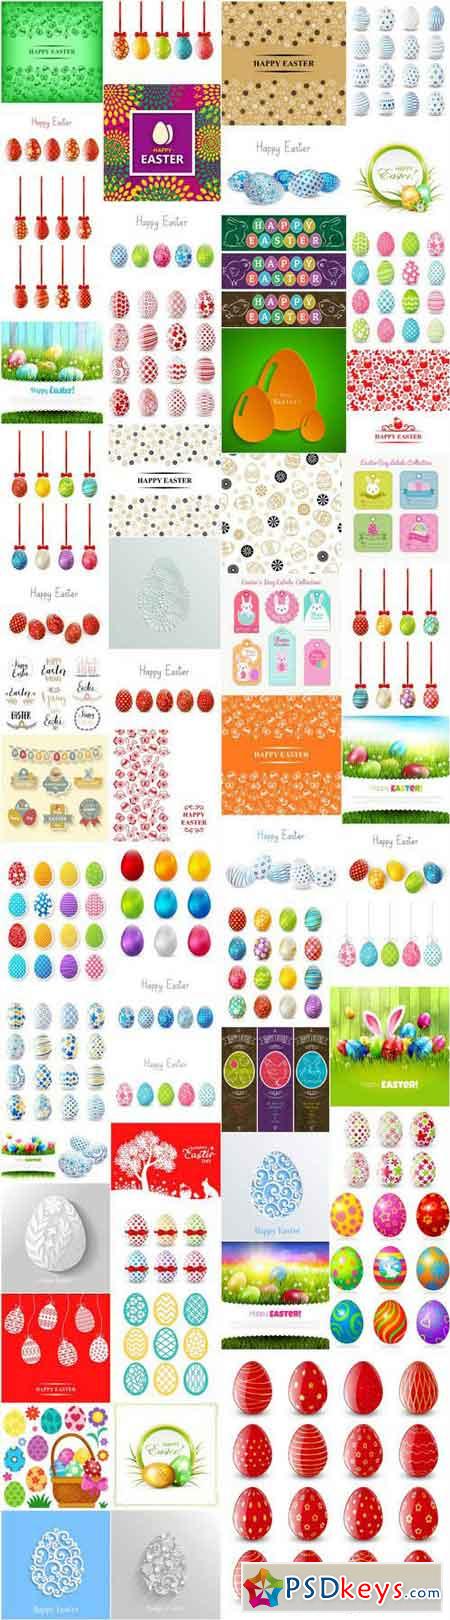 Happy Easter Easter Eggs Collection #2 - 55 Vector